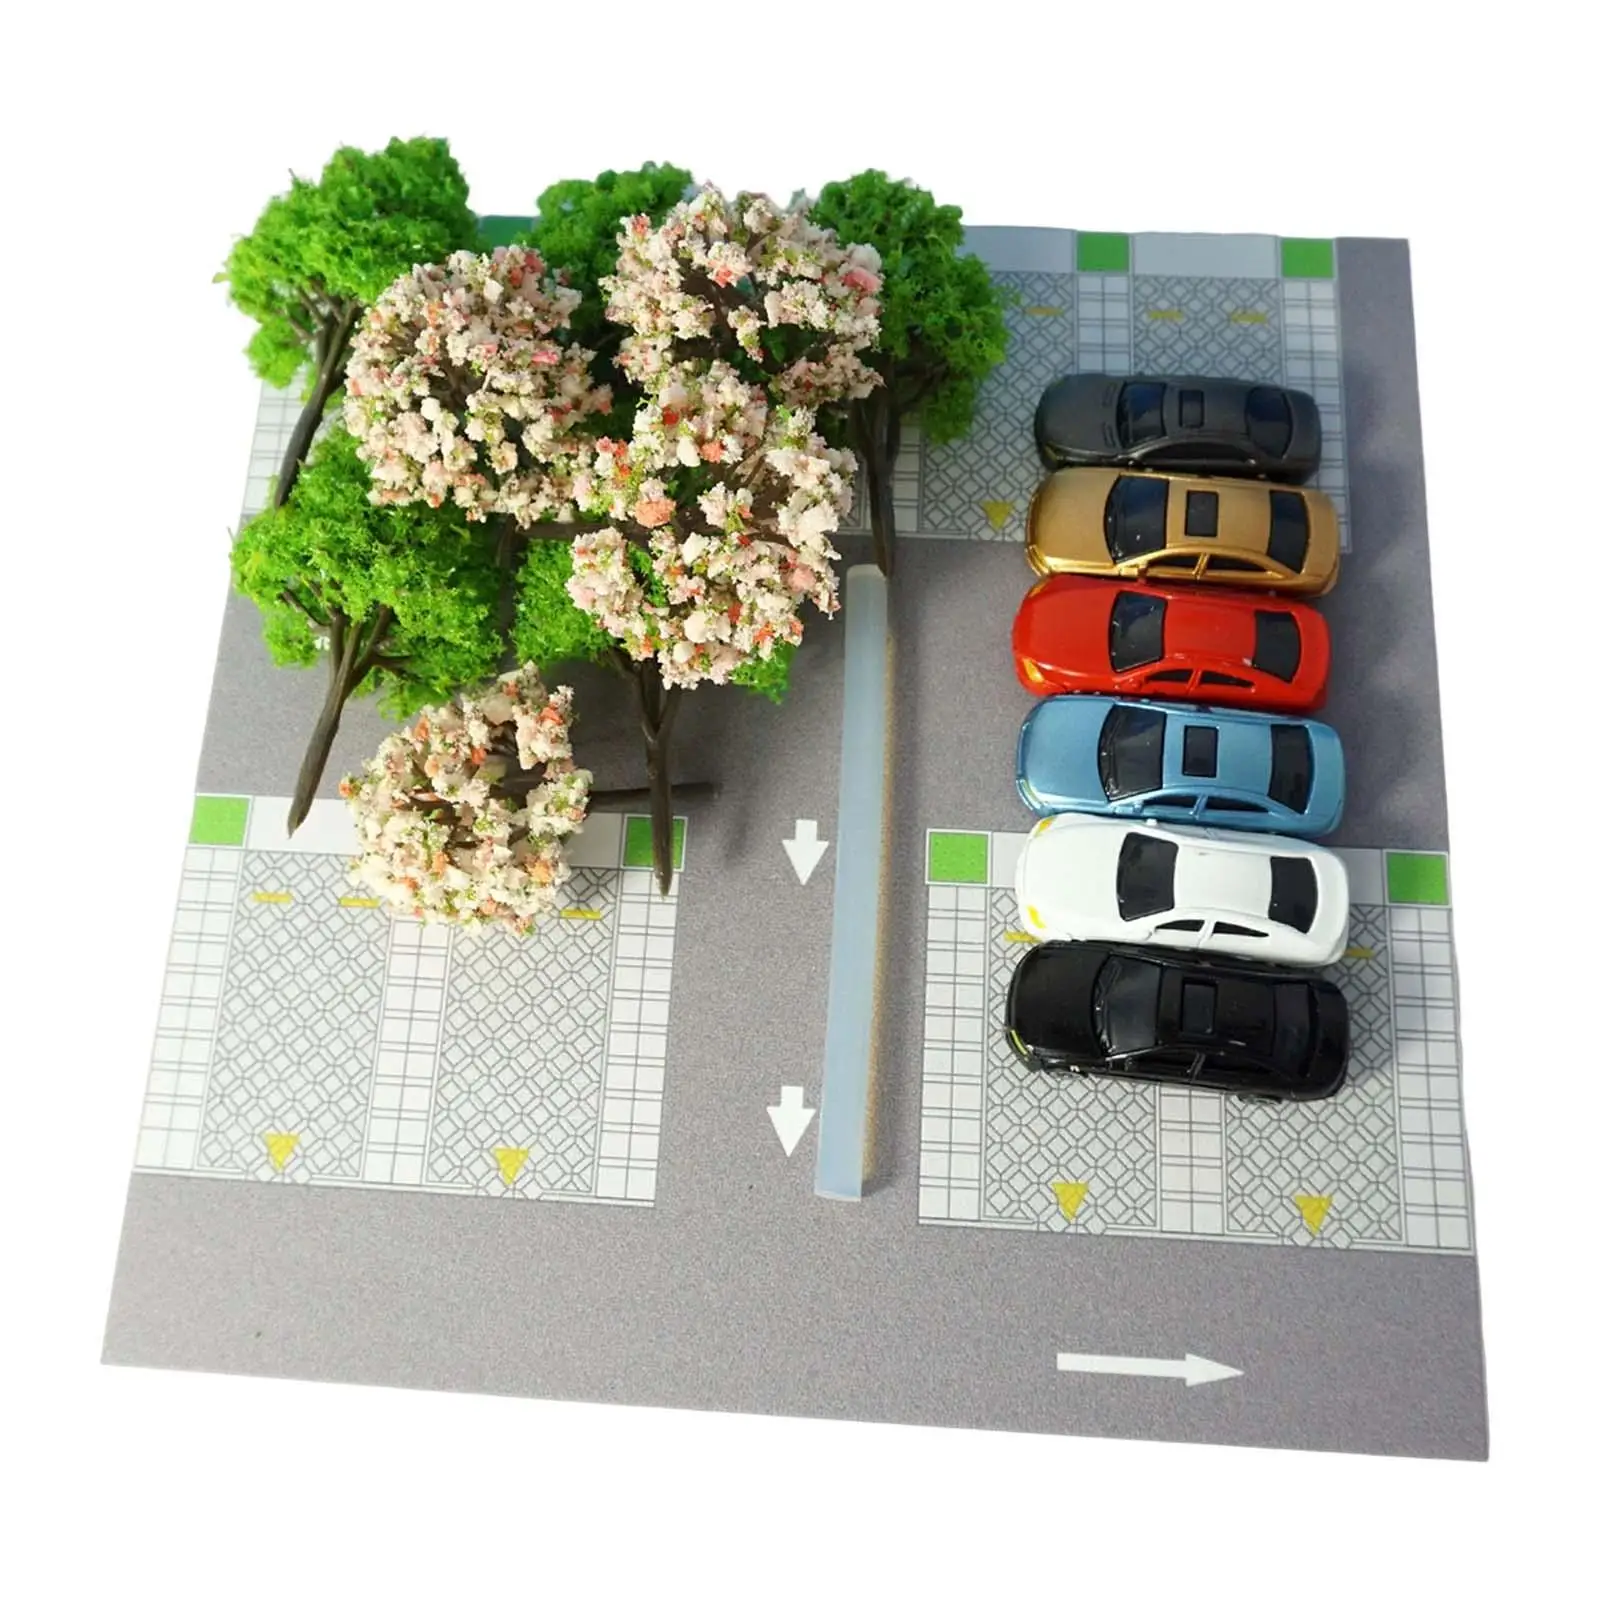 Parking Lot Building HO Scale Scenery collection Parking Lot Model Car Scene Display for Creativity Desk Home Concentration